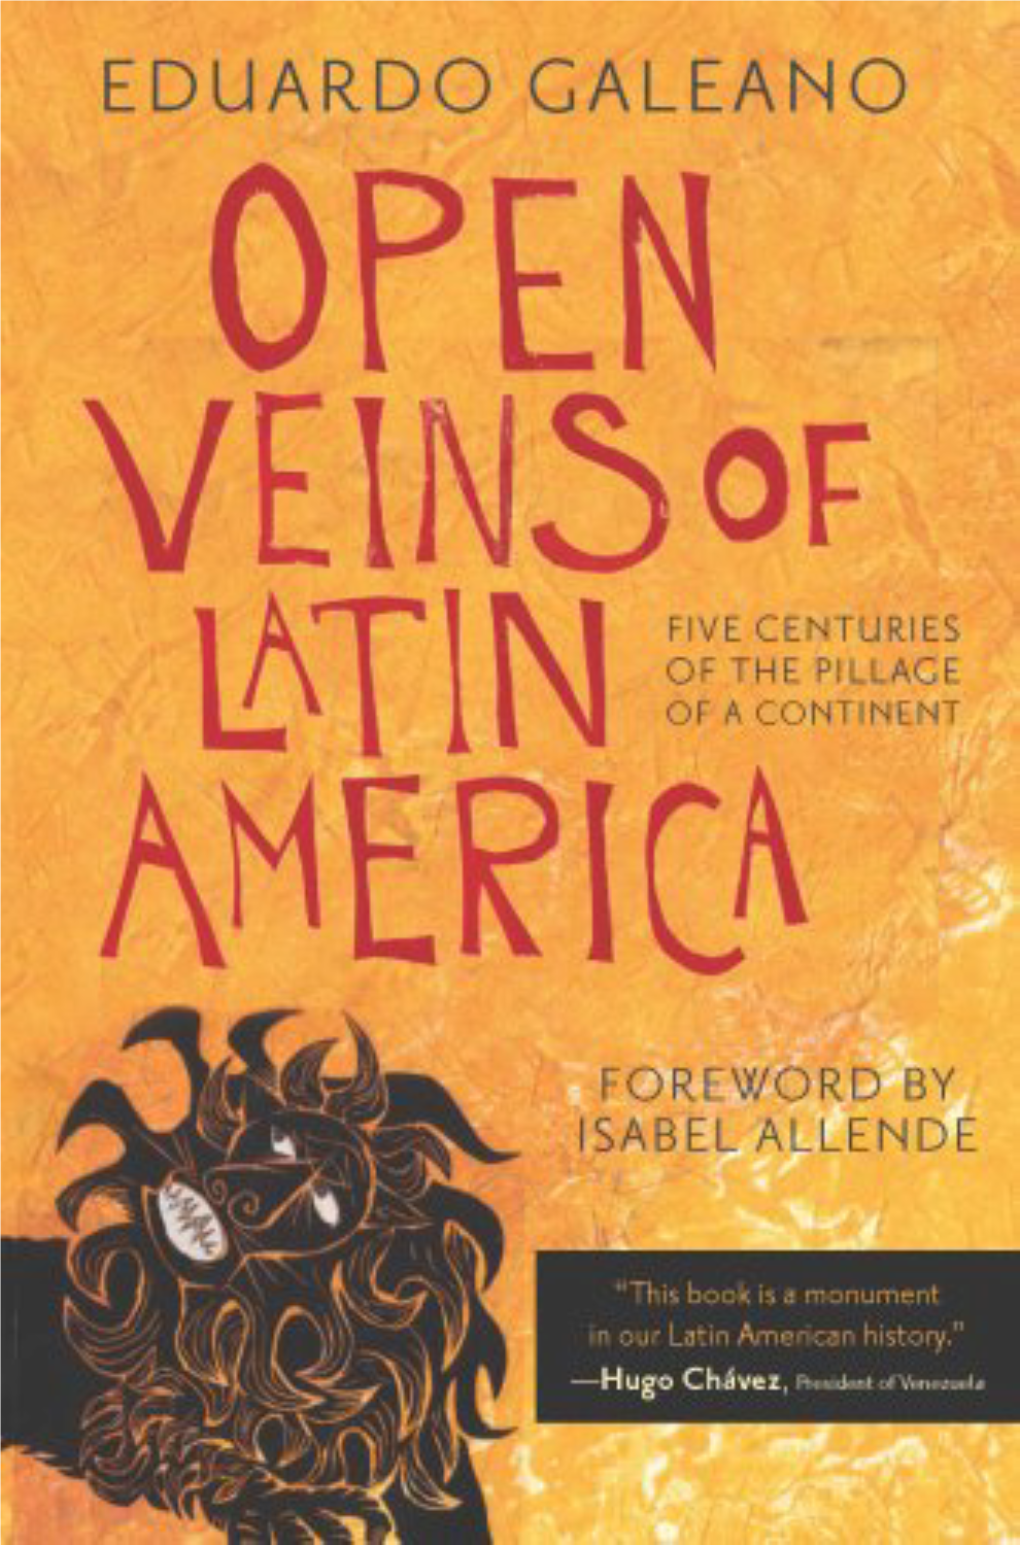 Galeano: Excepts from Open Veins of Latin America